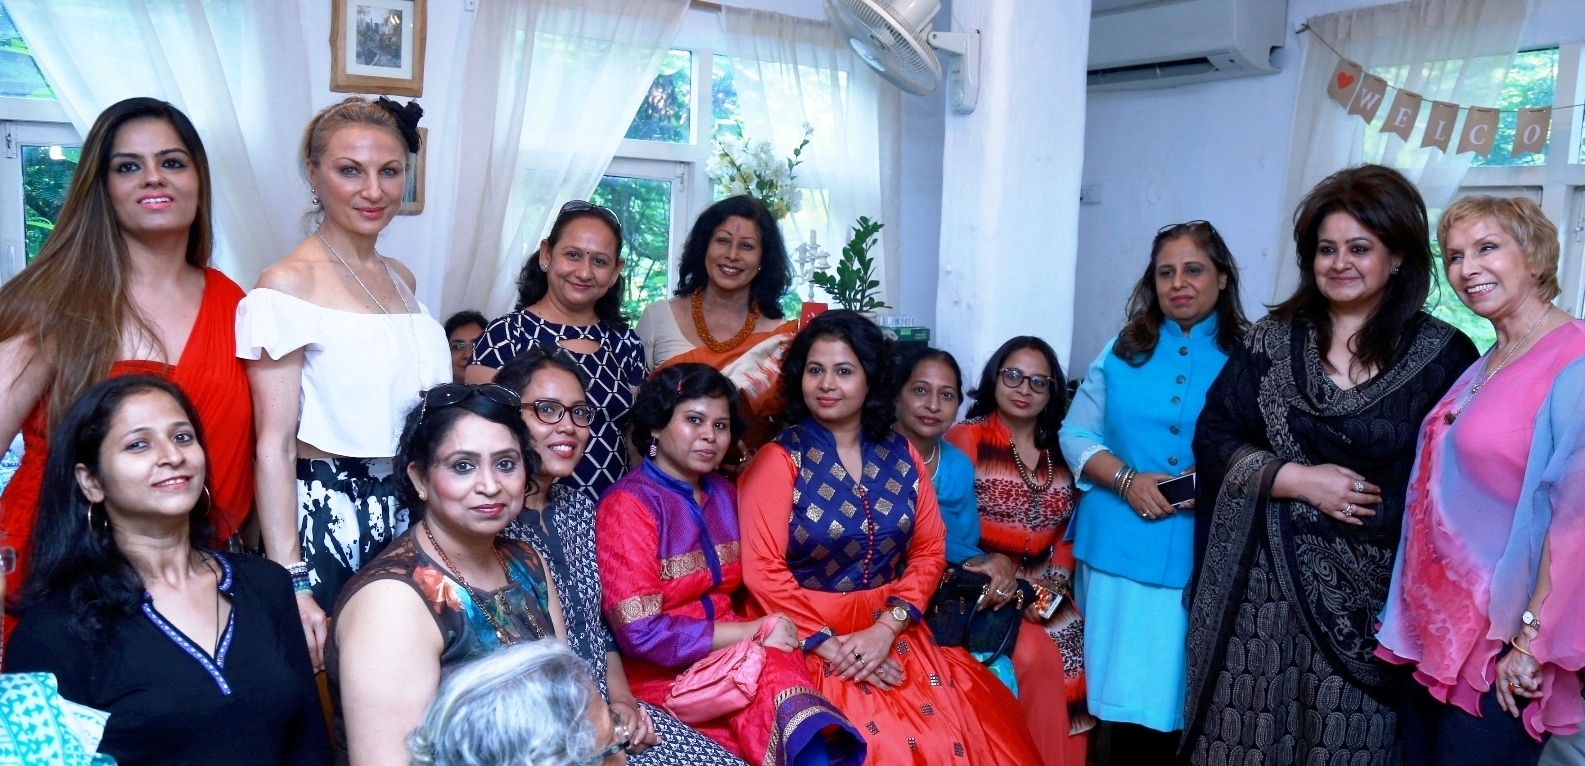 Hosts of the Afternoon Aromatherapist Dr. Blossom Kochhar and Dr. Meenu Walia with the Cancer survivors and Delhi based celebrities